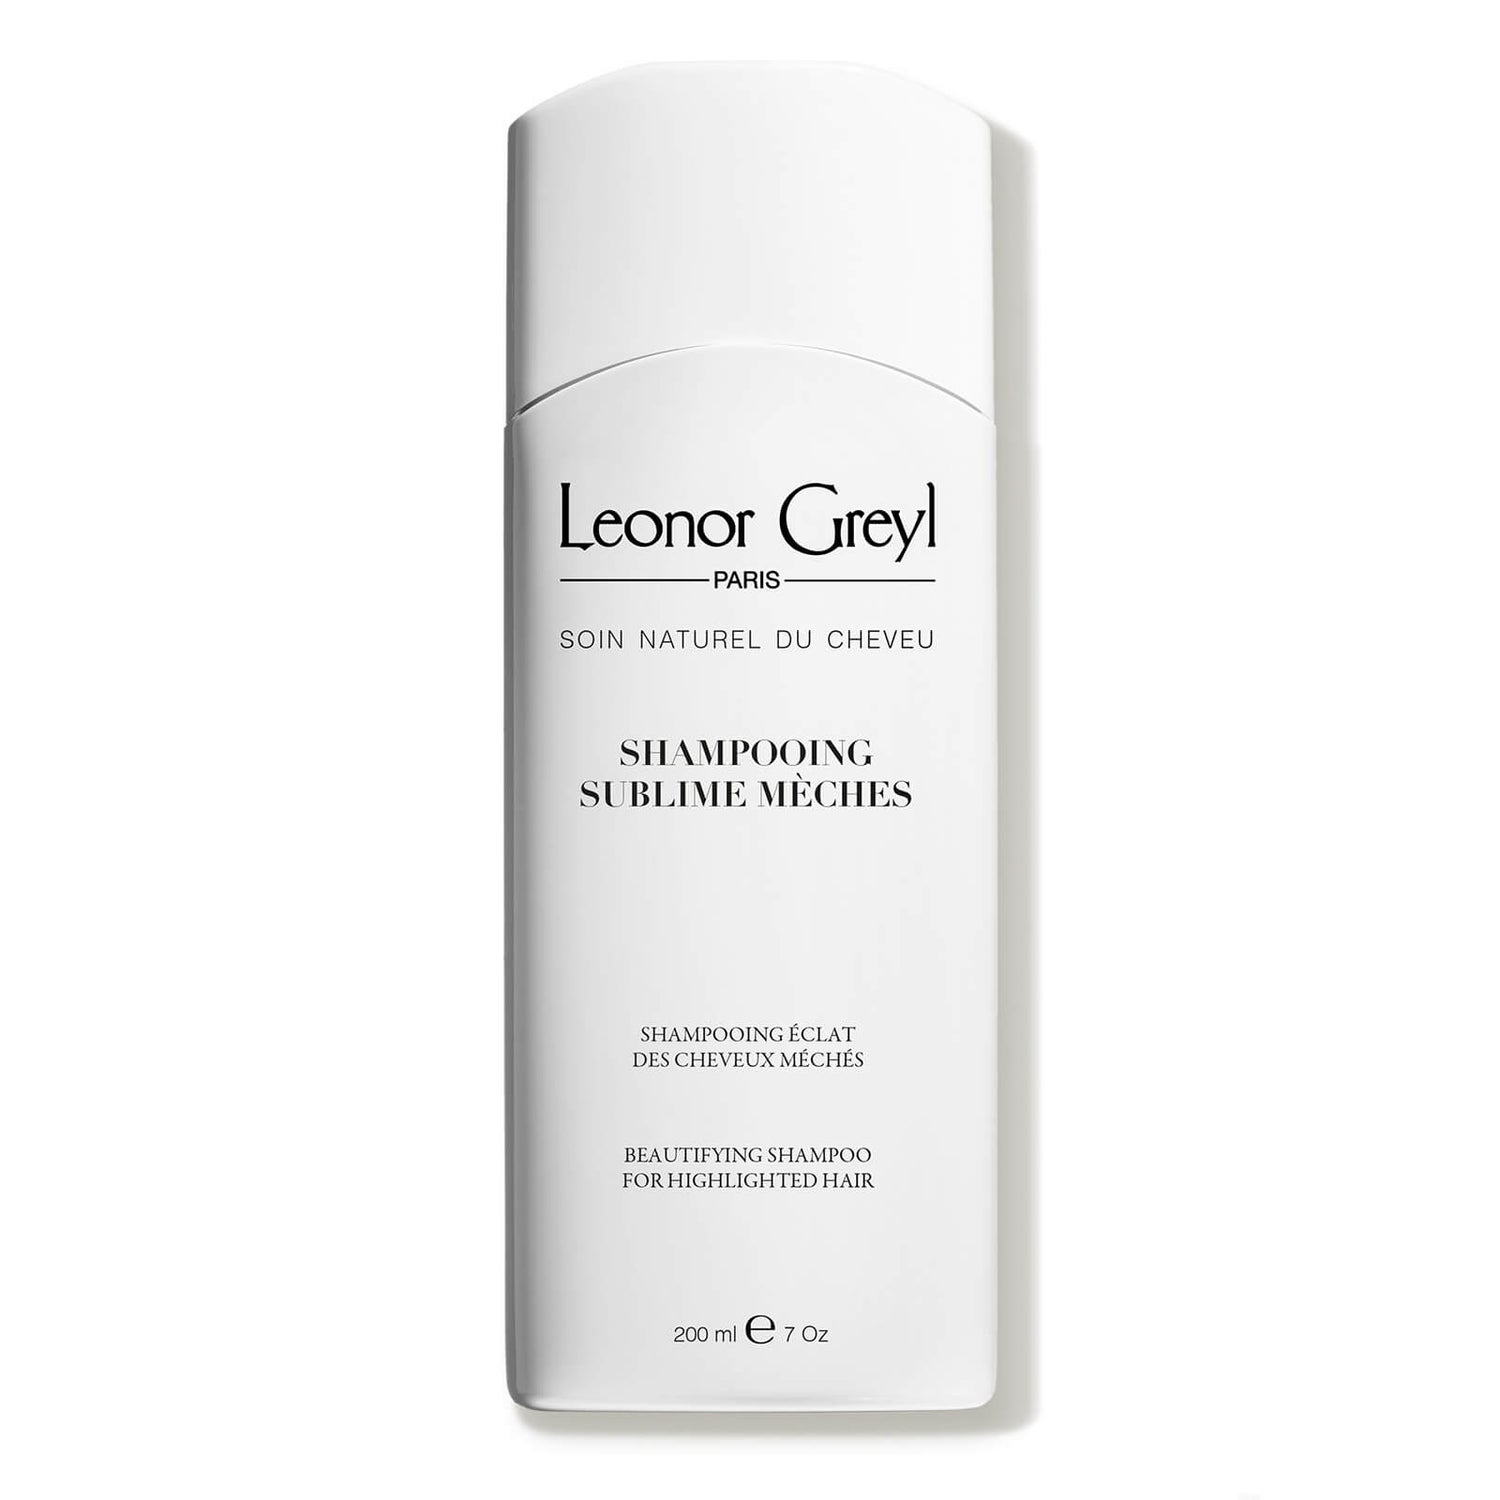 Leonor Greyl Shampooing Sublime Mèches (Specific Shampoo for Highlighted Hair)